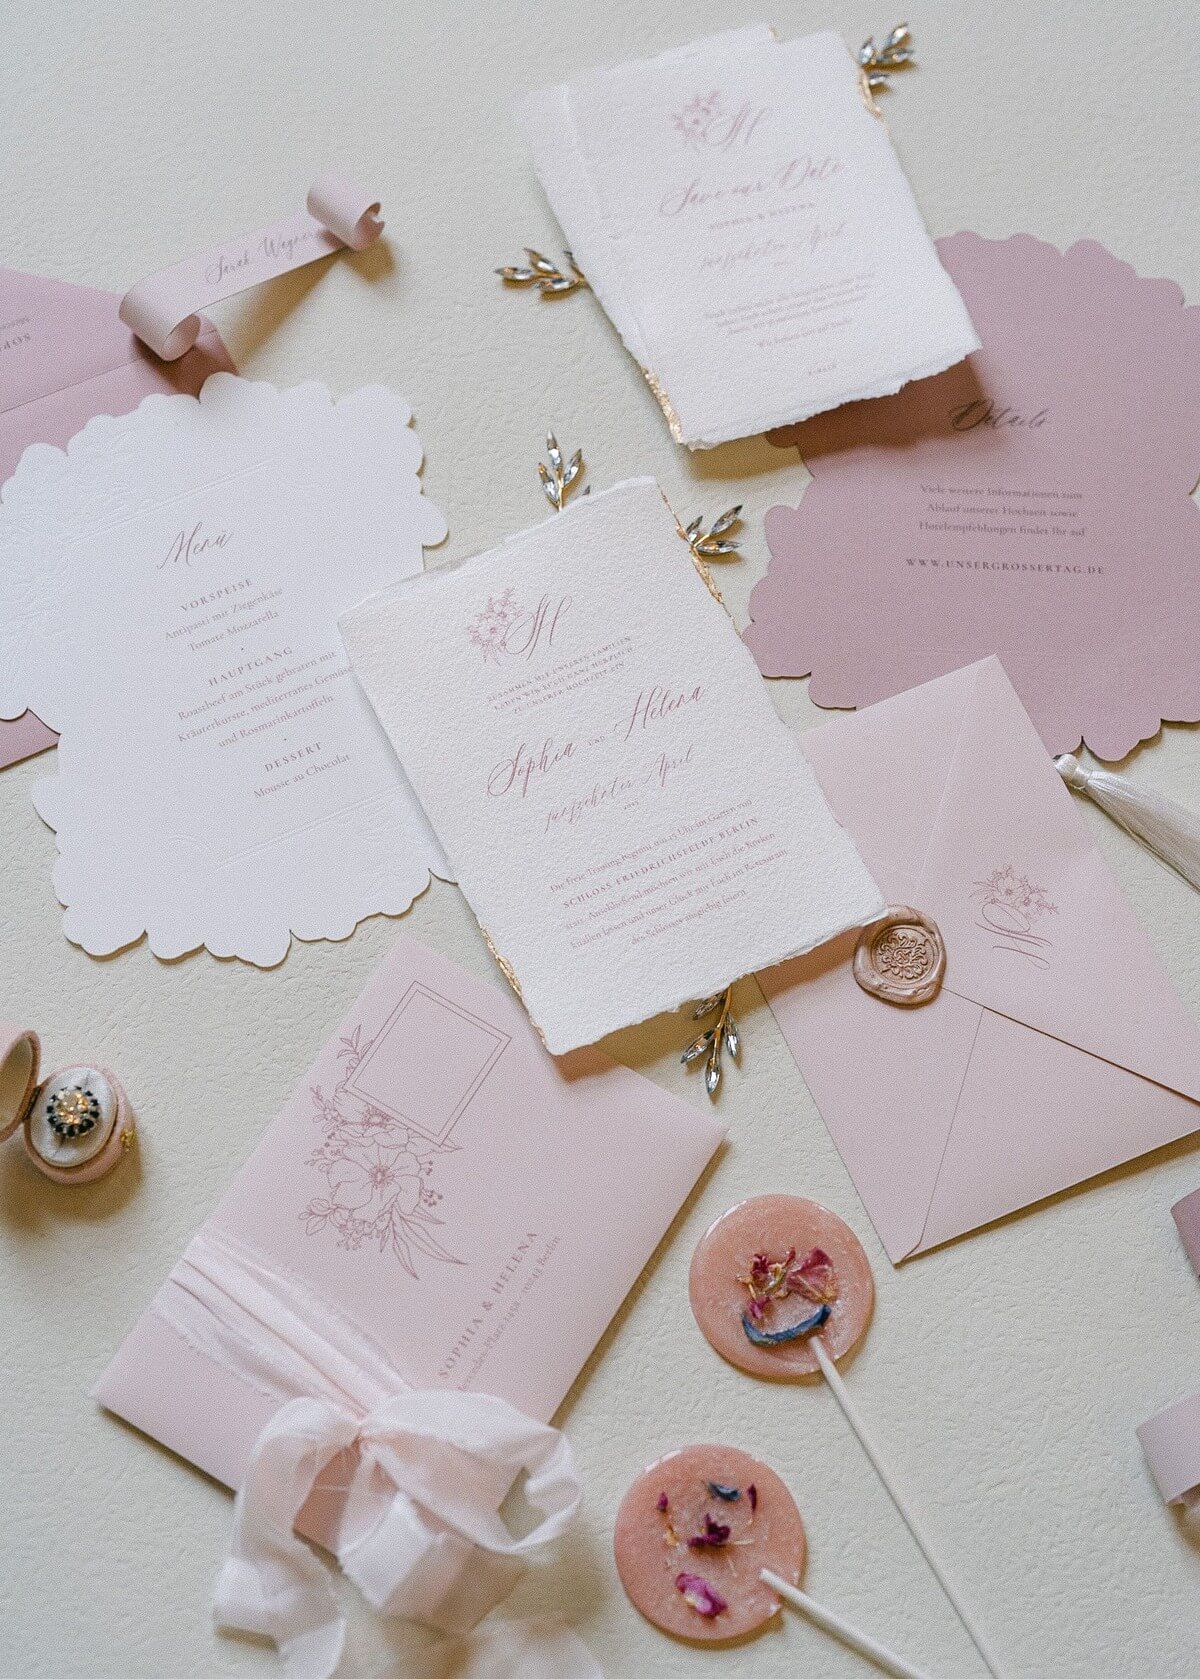 Finely designed flatlay of wedding invitations and menu cards in pastel shades with golden sealing wax sealing and floral accents on a light background for a wedding at Schloss Friedrichsfelde Berlin.